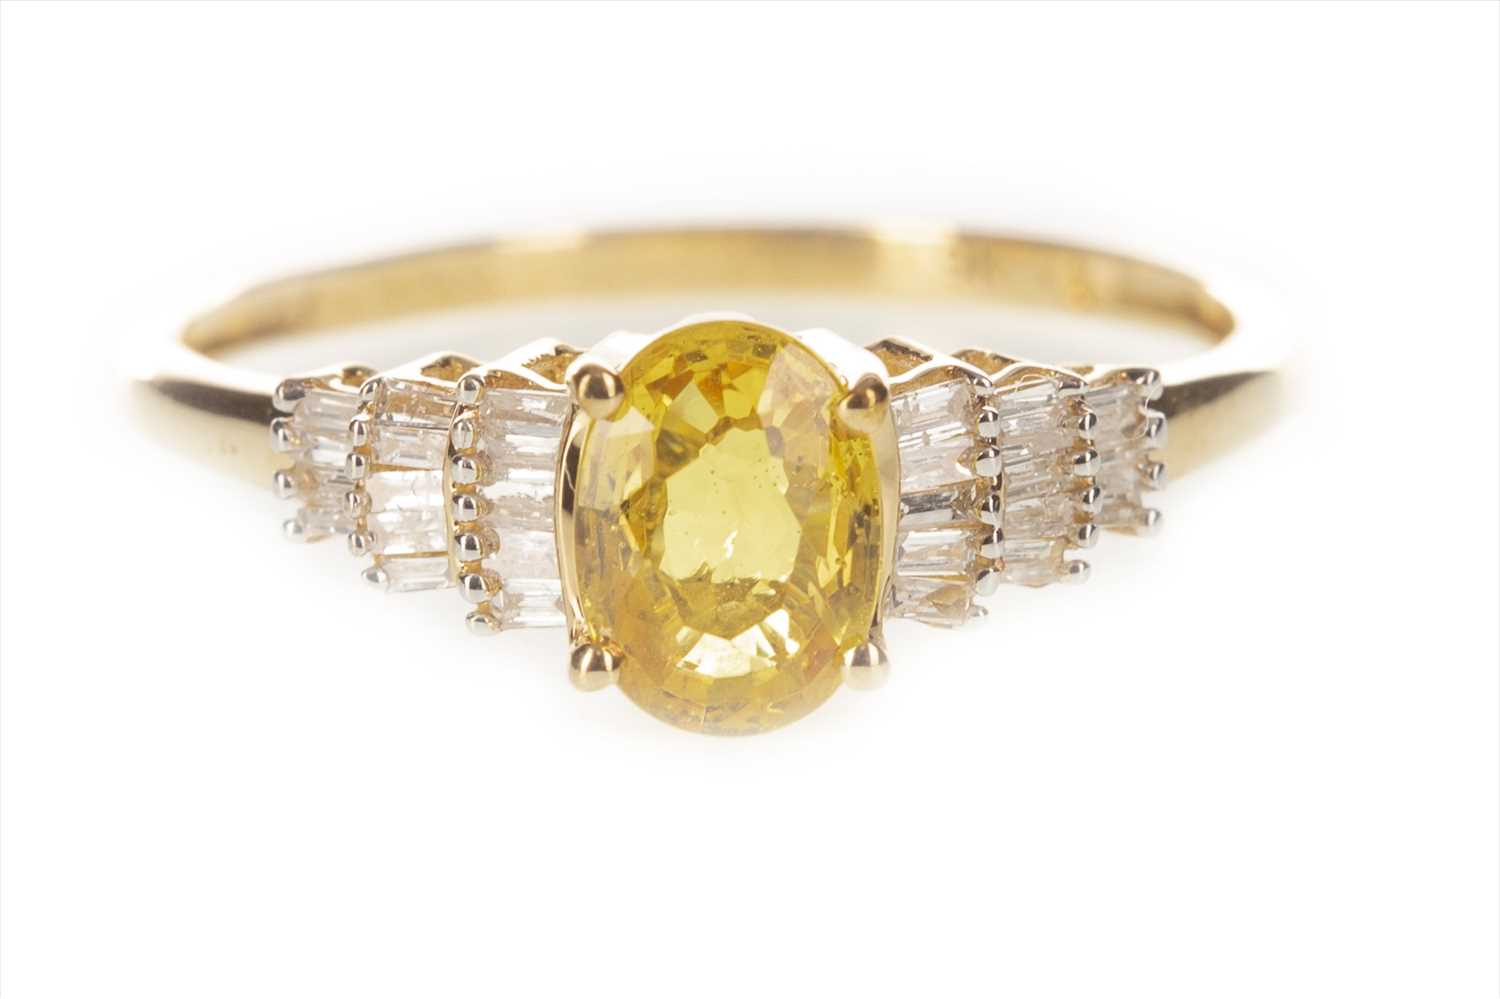 Lot 386 - A YELLOW SAPPHIRE AND DIAMOND RING